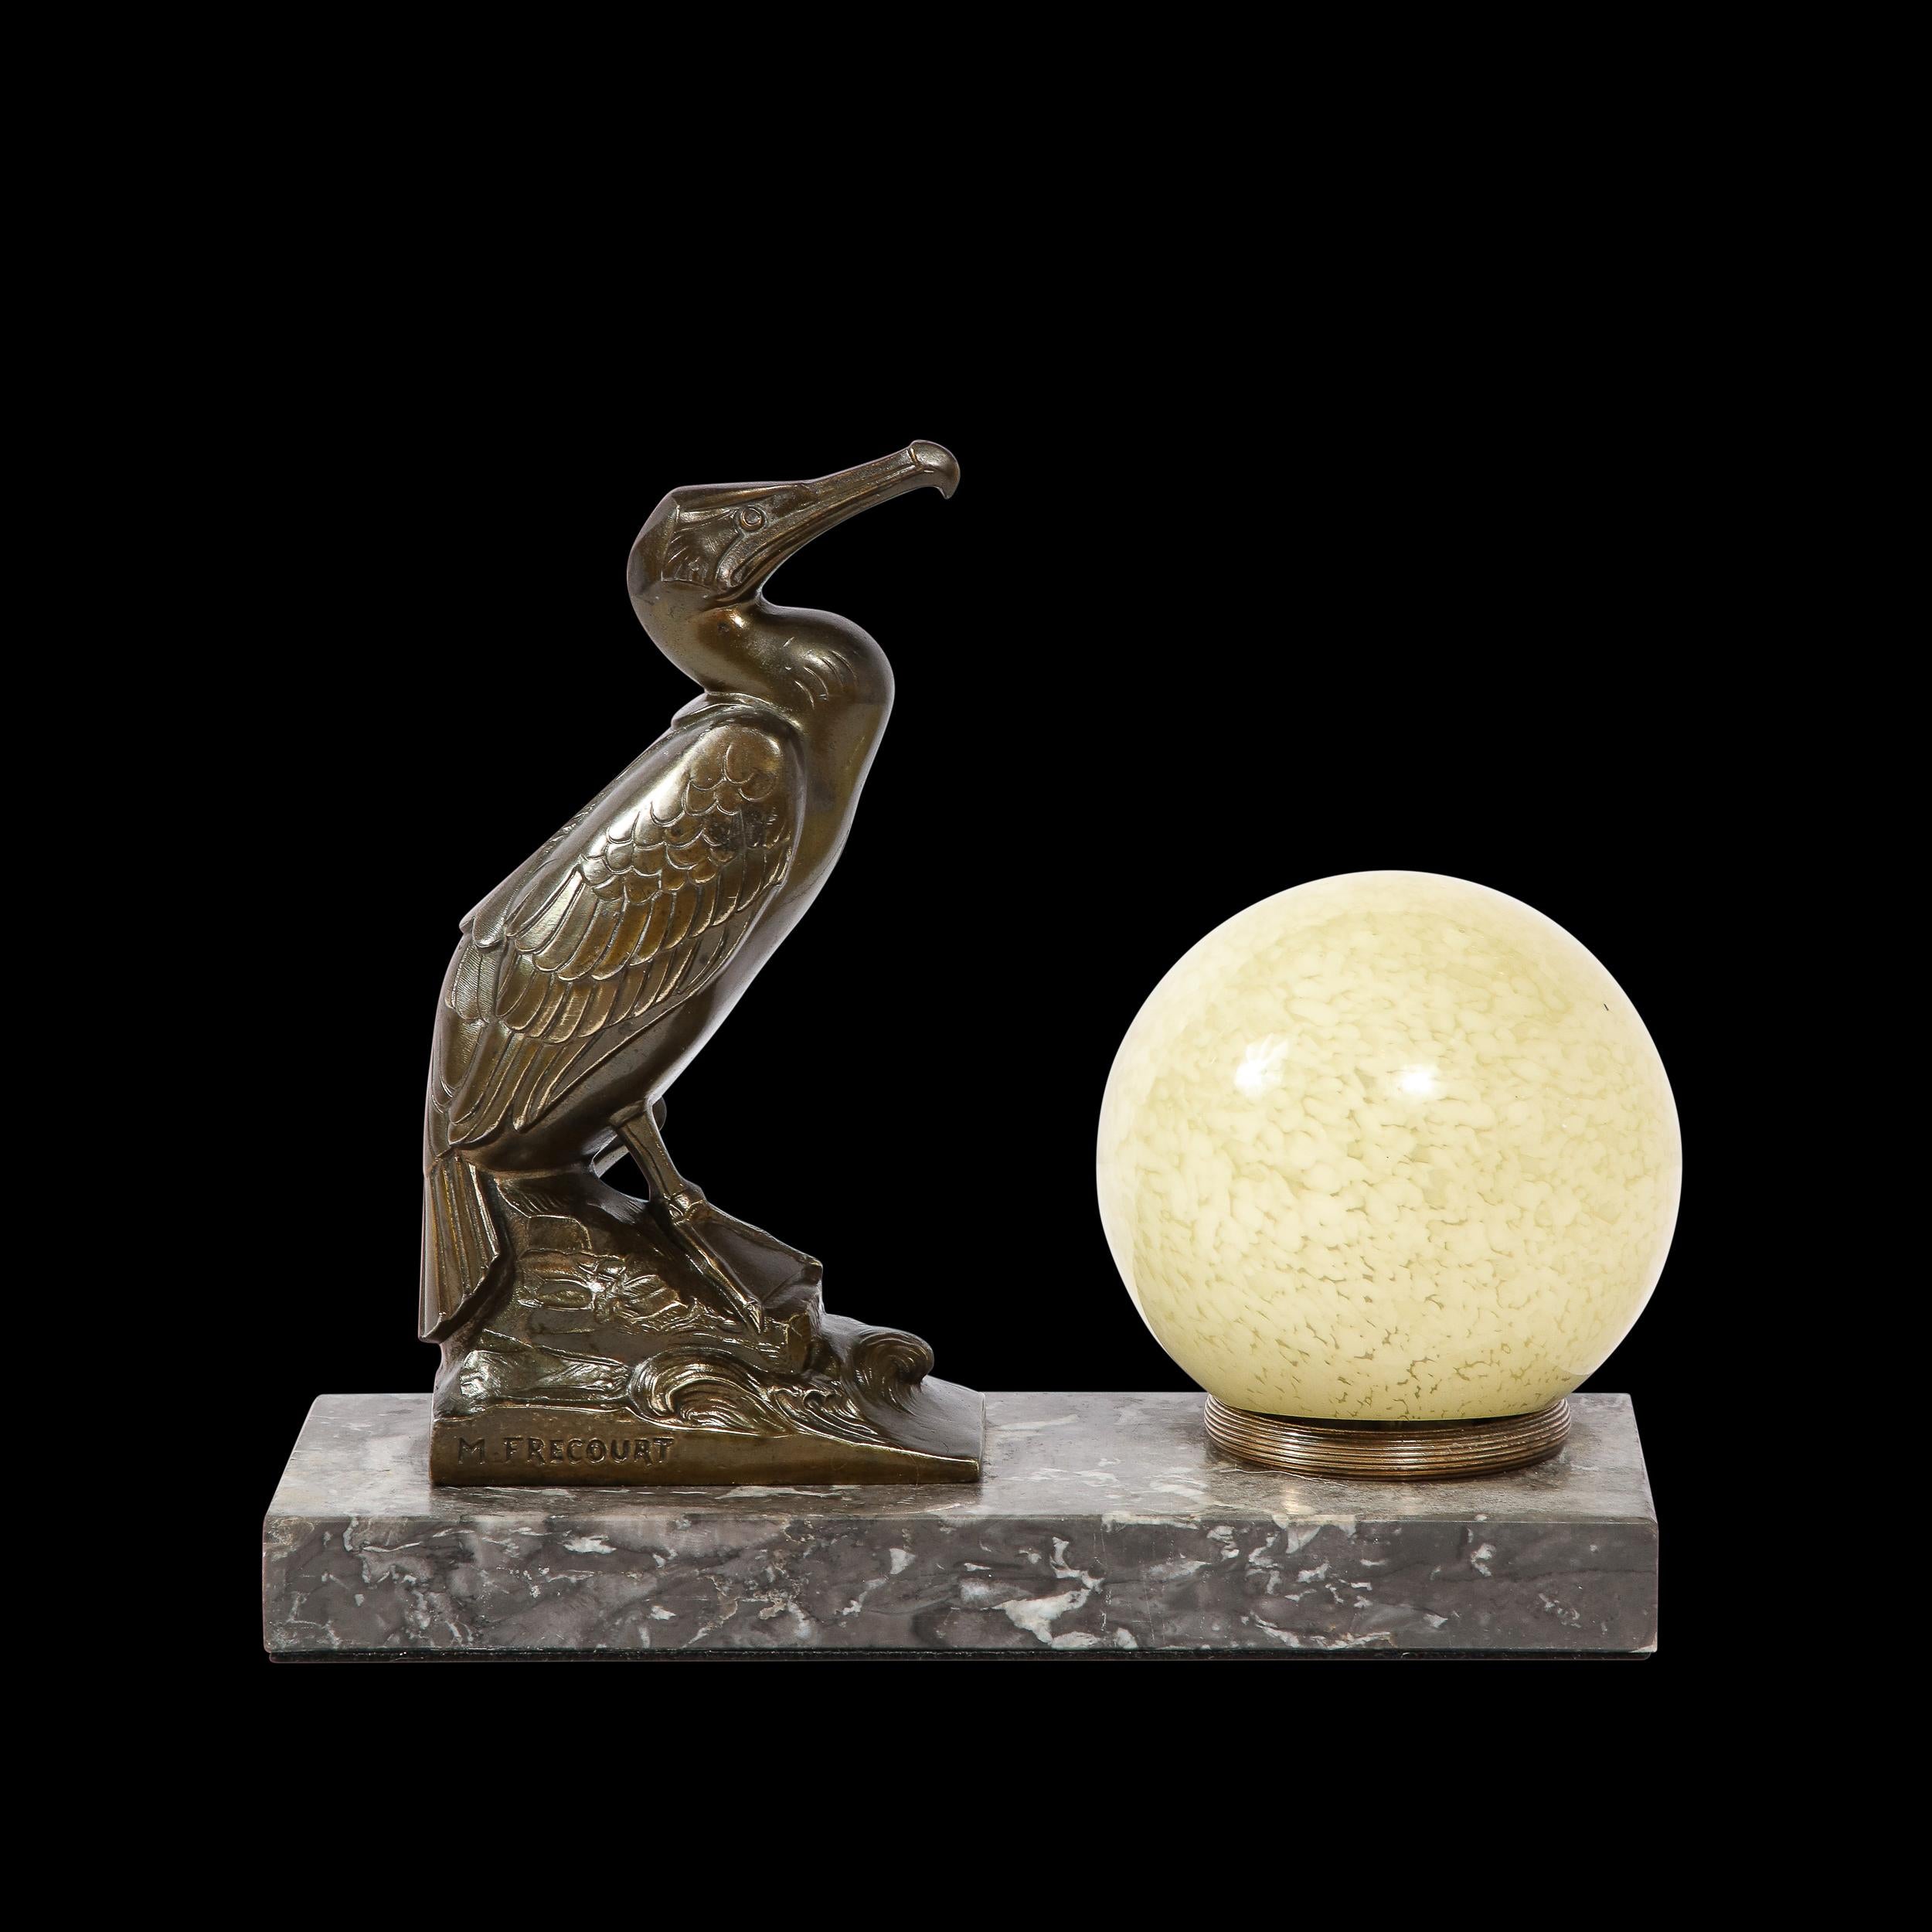 This unique and striking Art Deco Table Light in Caste Bronze with Marquina Marble Base and Hand-Blown Glass Shade is by the artist Maurice Frecourt, originating from France, Circa 1925. Featuring a stylized cormorant rendered in caste bronze